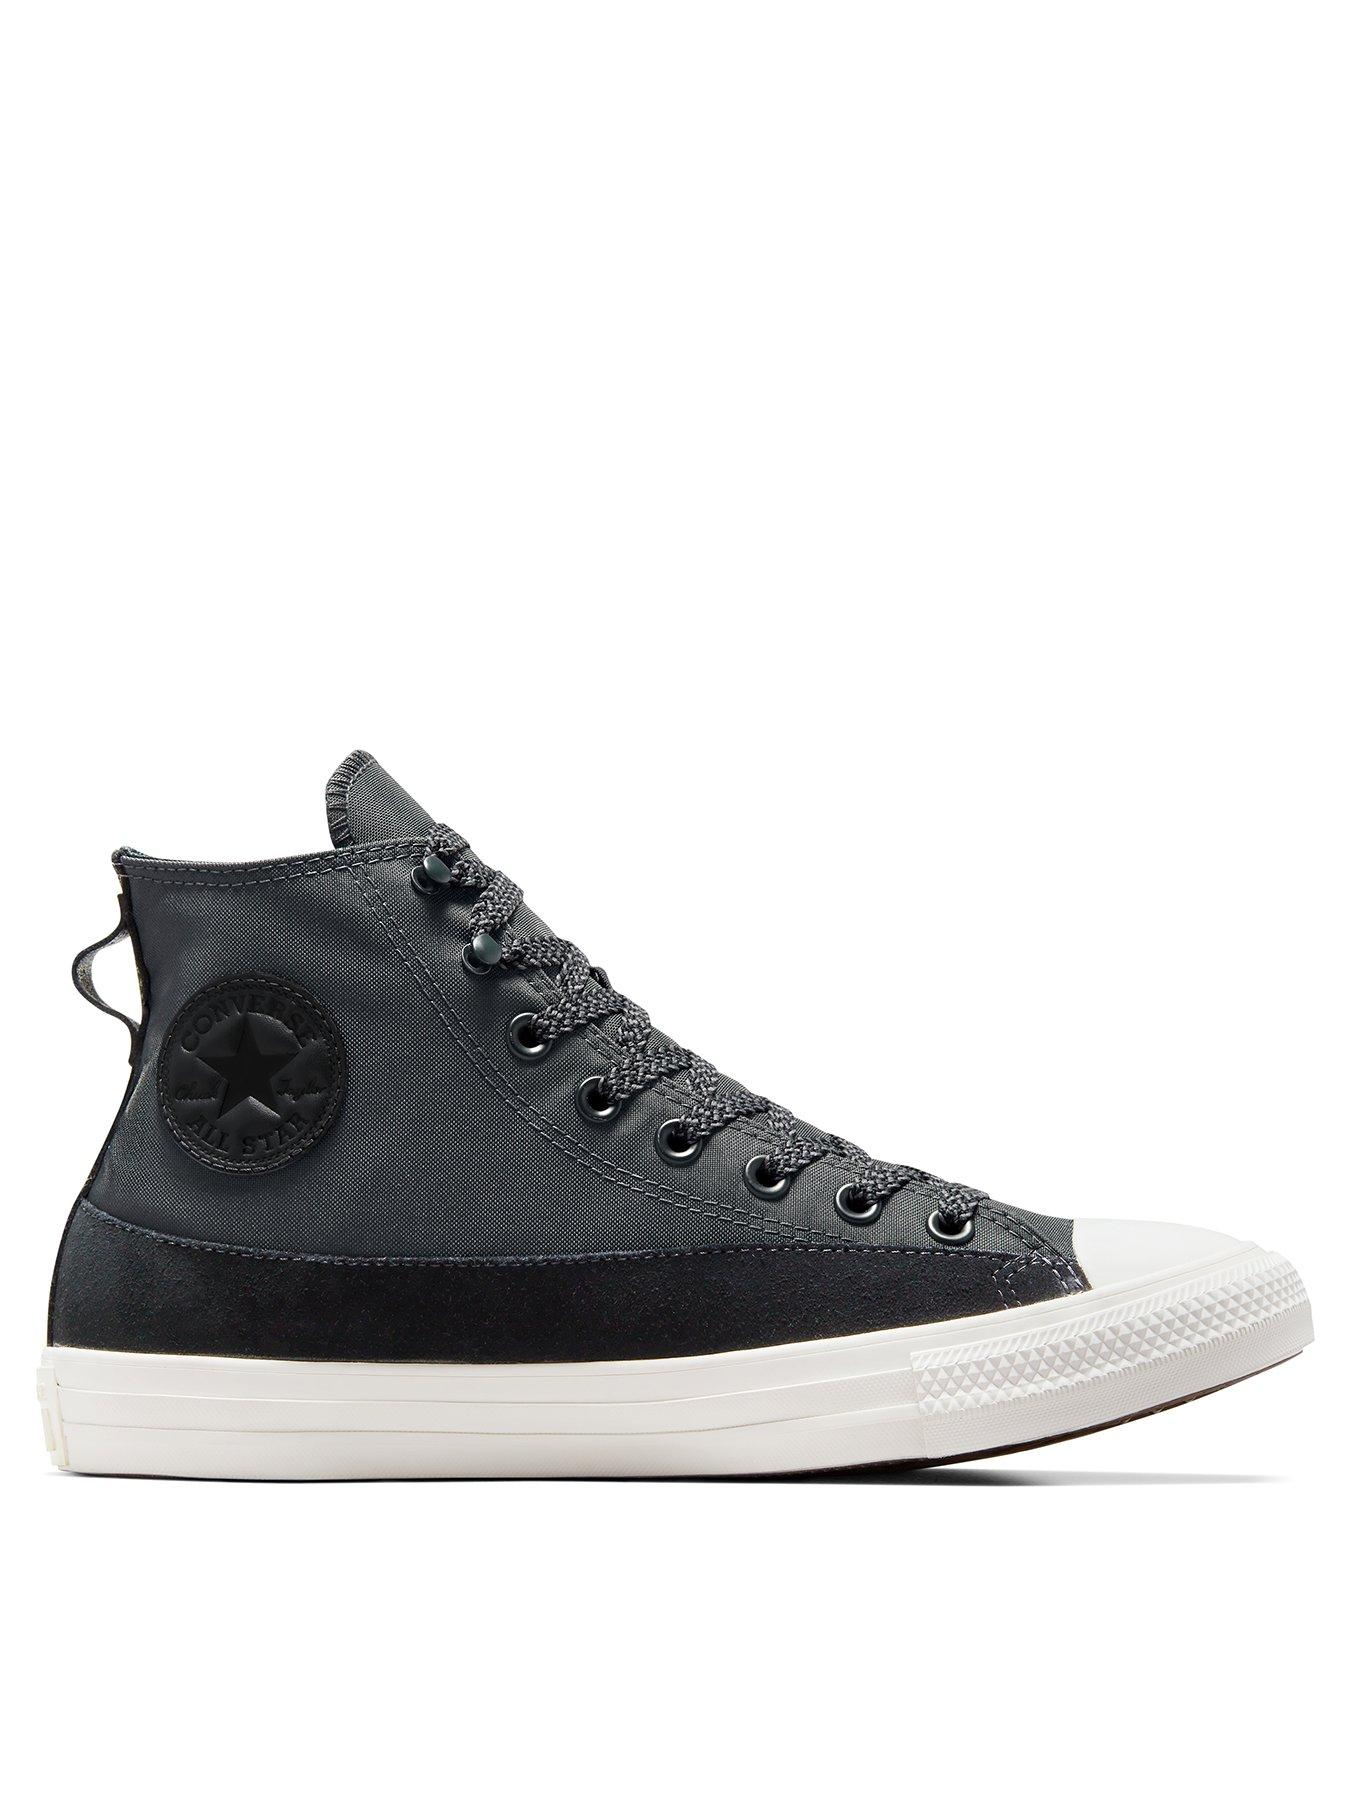 Converse Shoes, Trainers Ireland Clothing & | High Very Tops 